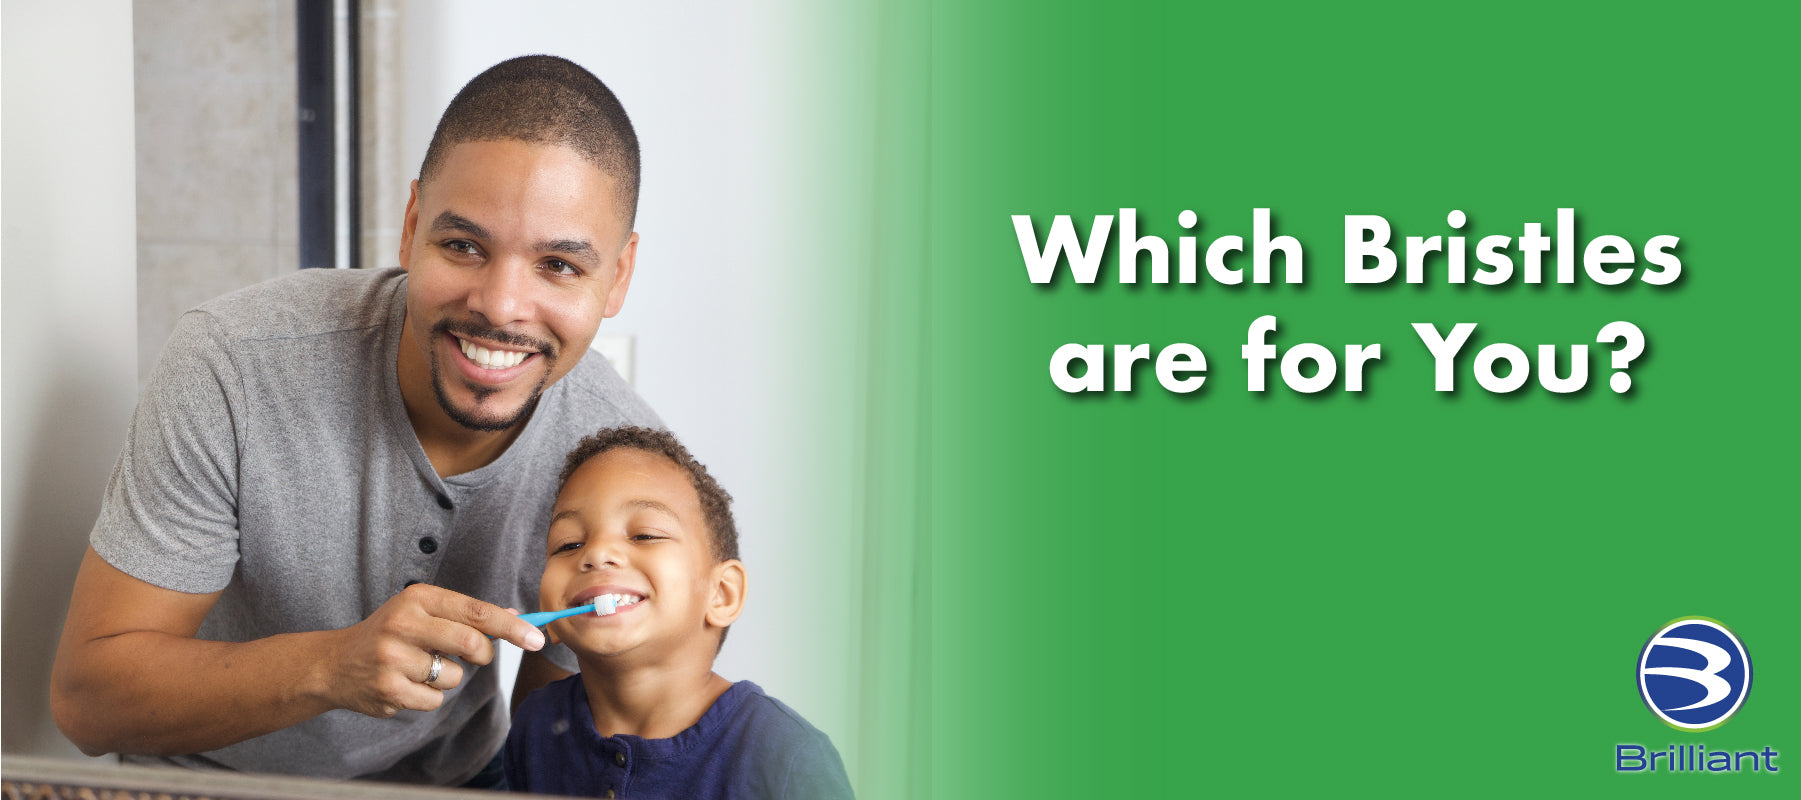 Which Toothbrush is Best: Extra Soft, Soft, Medium, or Hard?